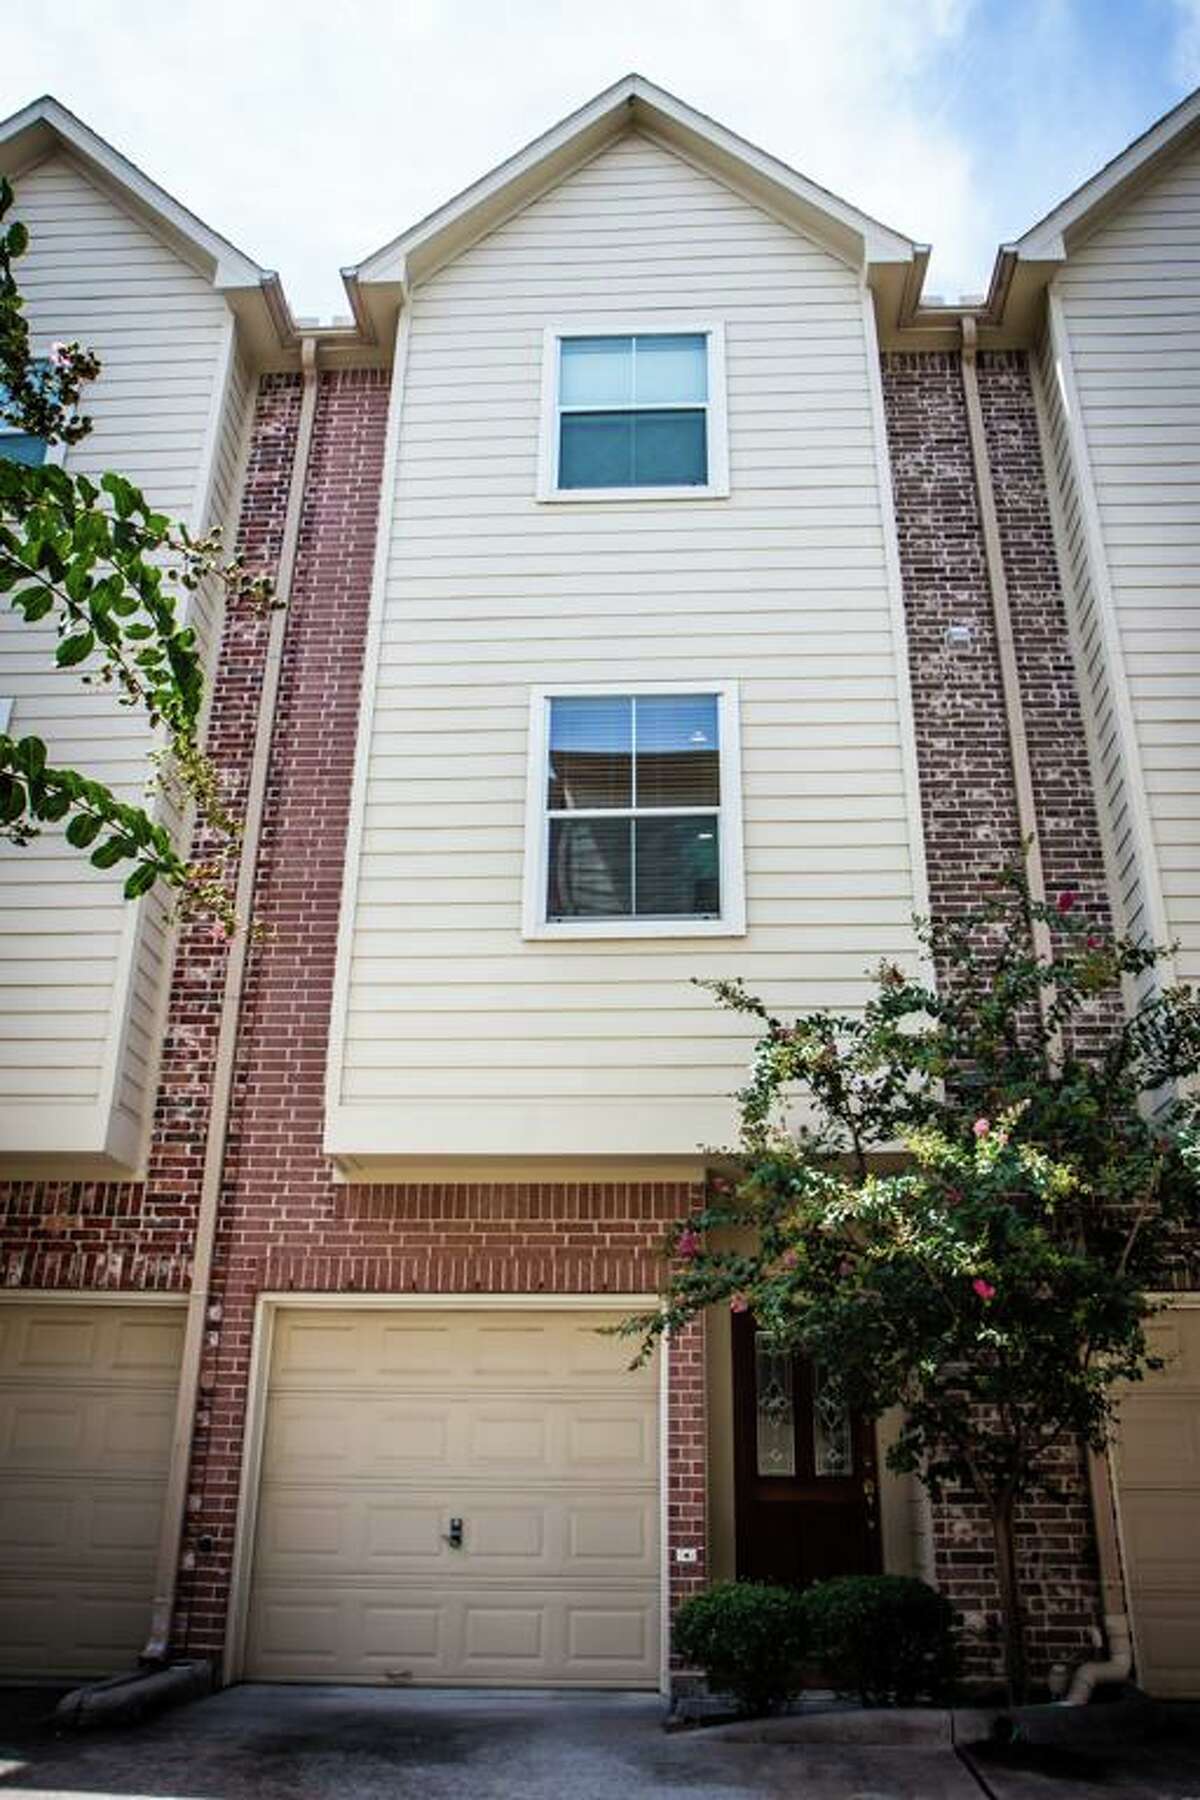 Houston  2902 Chenevert, Unit P: $282,500 / 1,344 square feet Click to see what Houston's average home price could buy around the country.